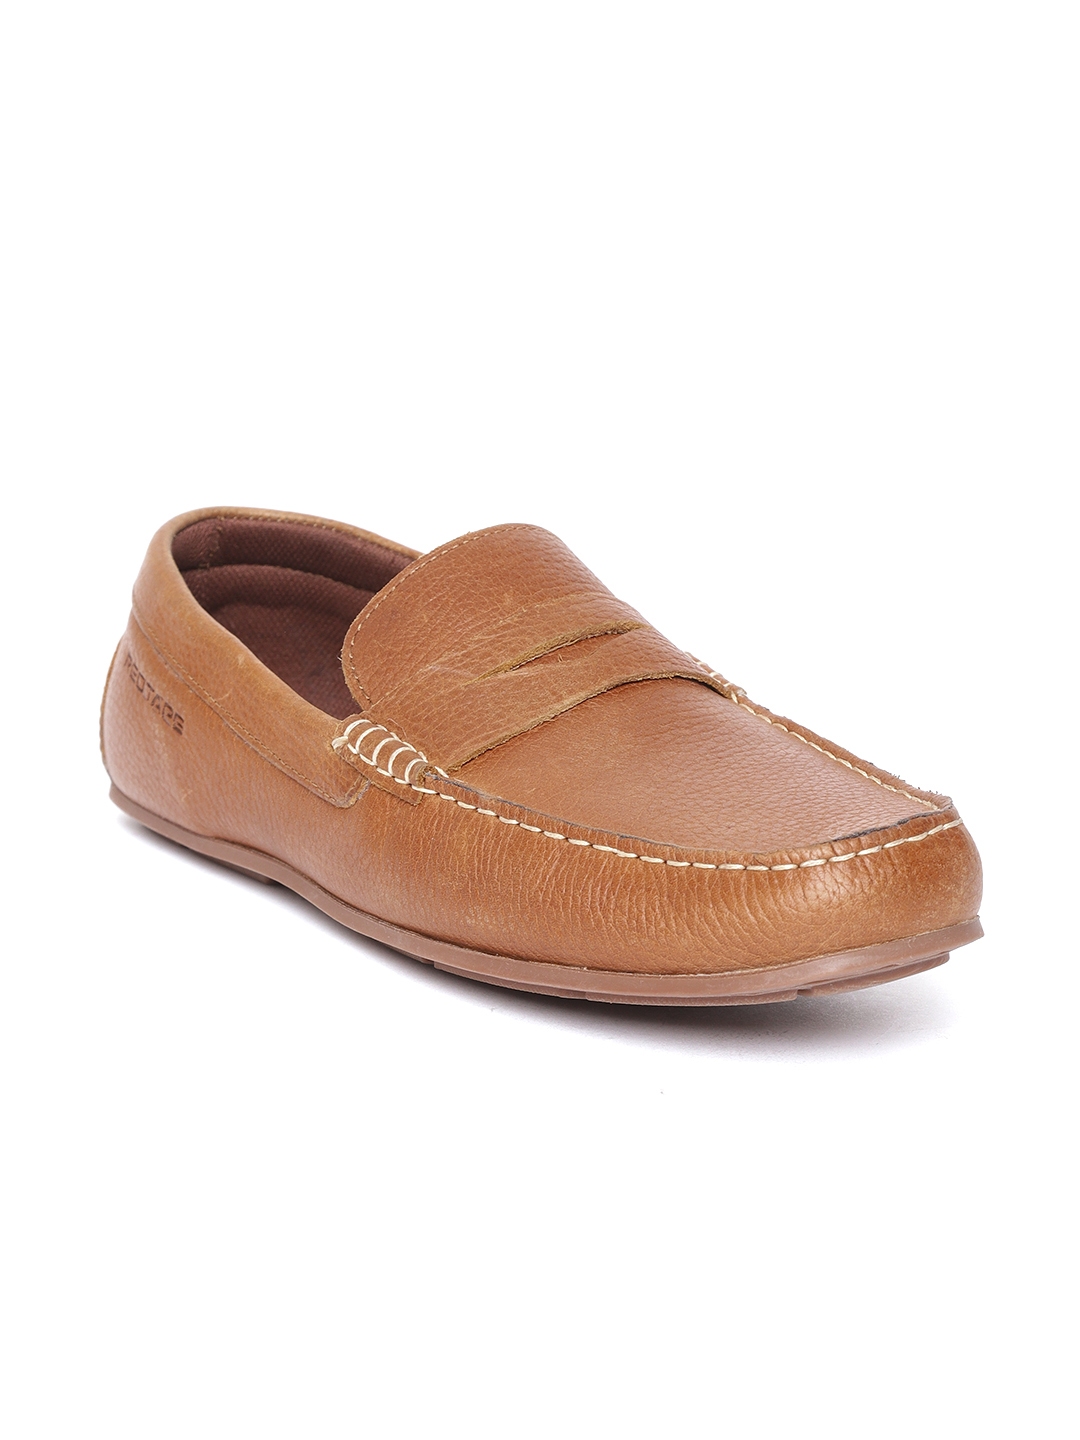 Buy Red Tape Men Tan Brown Leather Loafers - Casual Shoes for Men ...